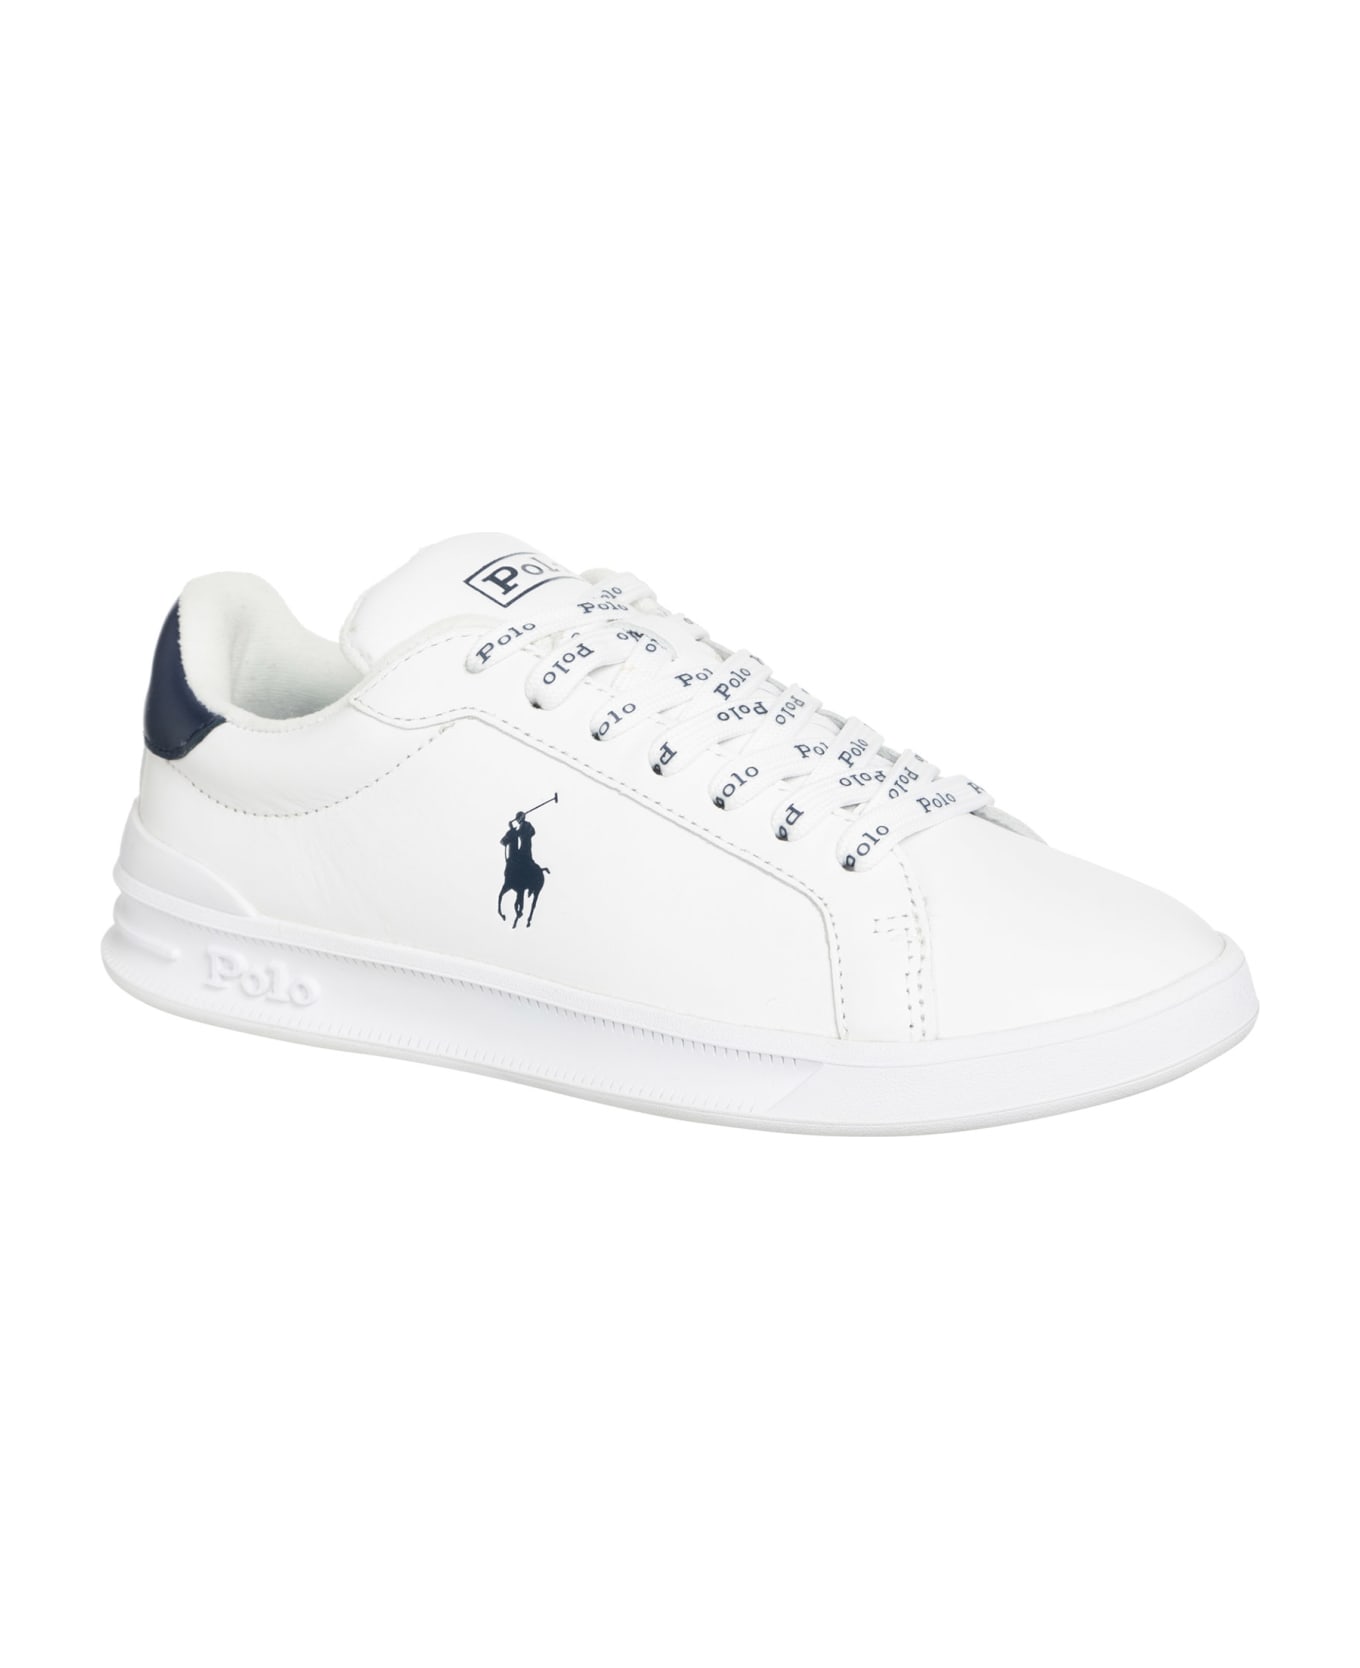 Polo Ralph Lauren Heritage Court Ii Leather Sneakers - White/blue スニーカー